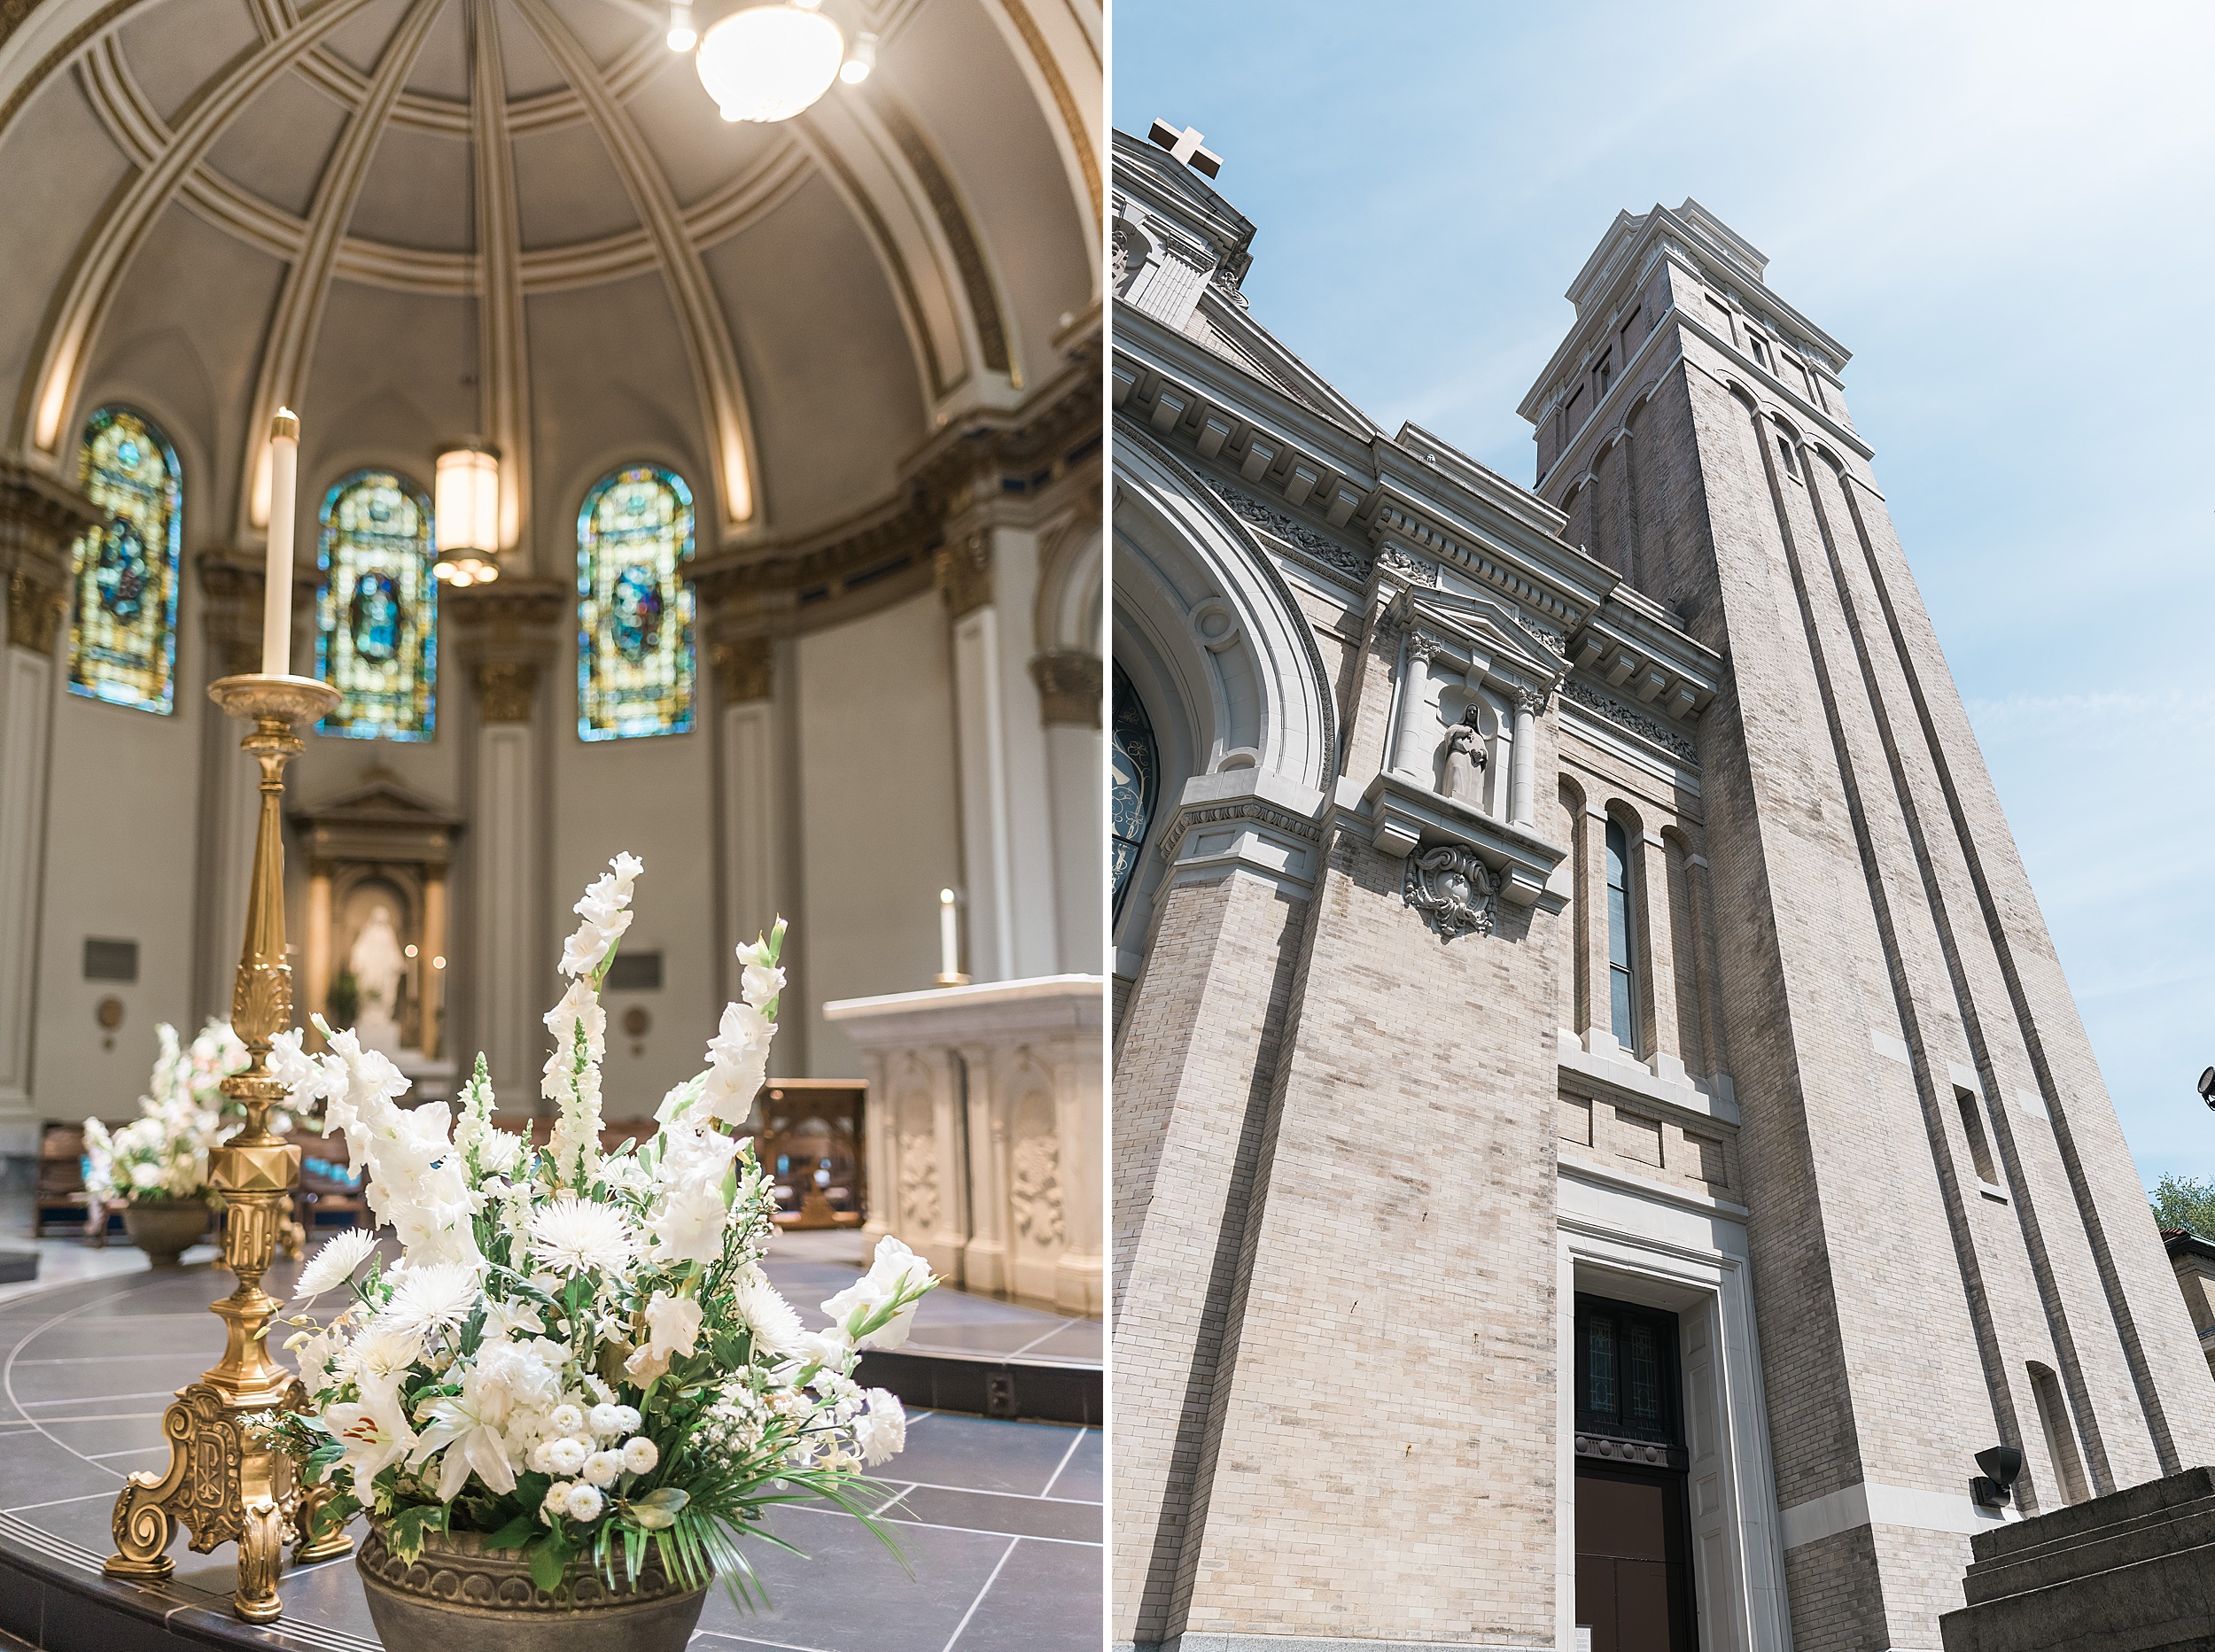  wedding photos at st james cathedral seattle 